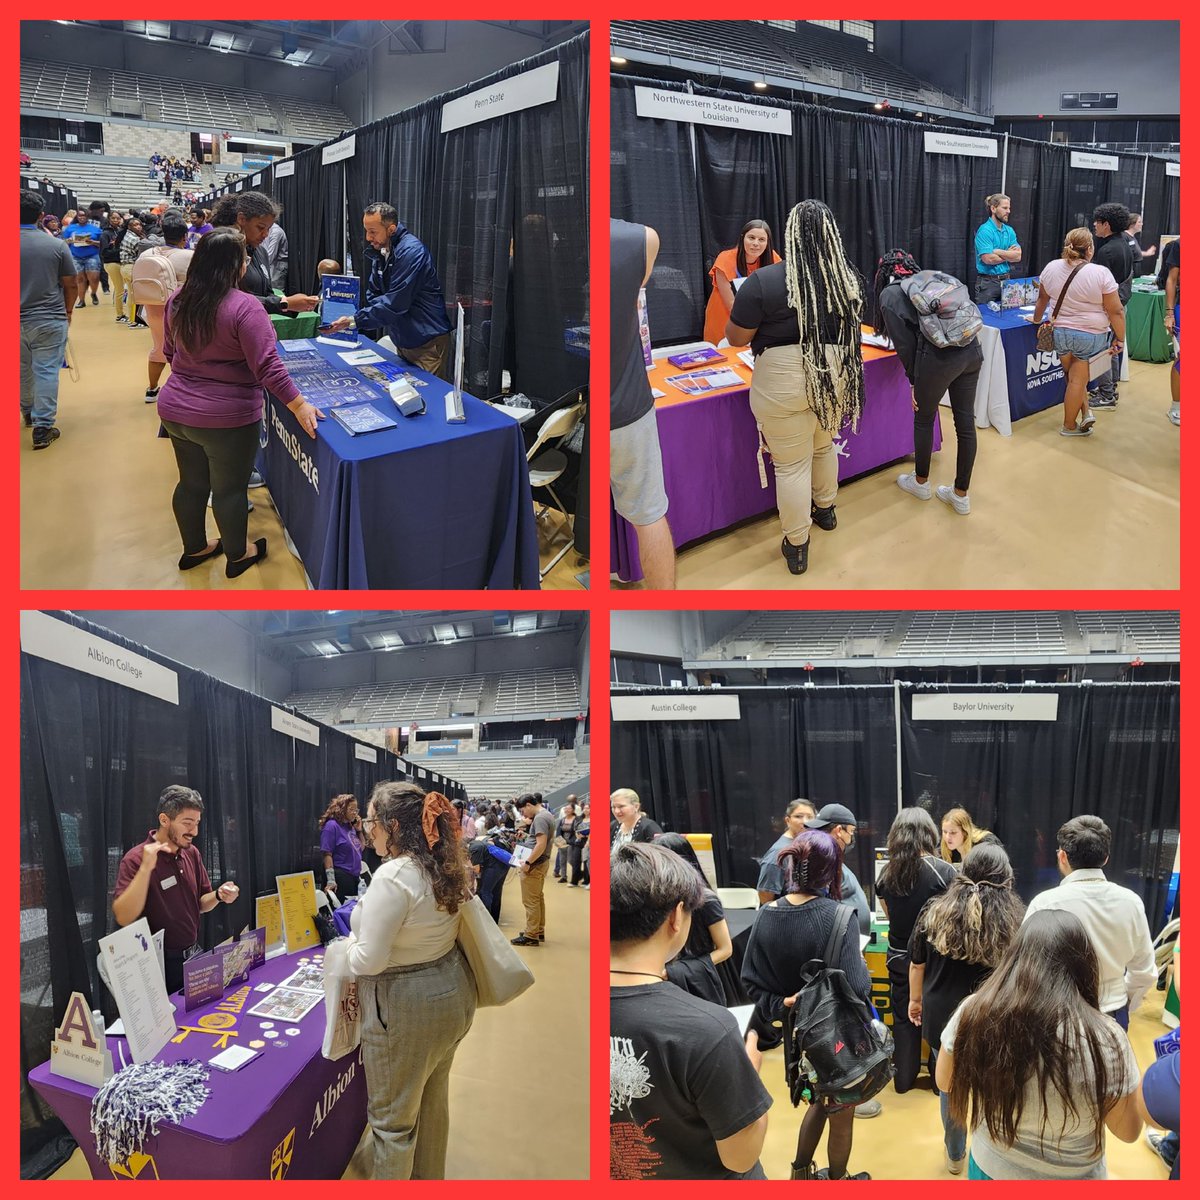 Promoting equity and excellence in tonight's college fair for all students and also honoring the top 10% of our @dallasschools graduates! Great job by @CounselingDISD putting this event together for our students and families. #DallasISDExcellence @DallasISDSupt @AngieGaylord